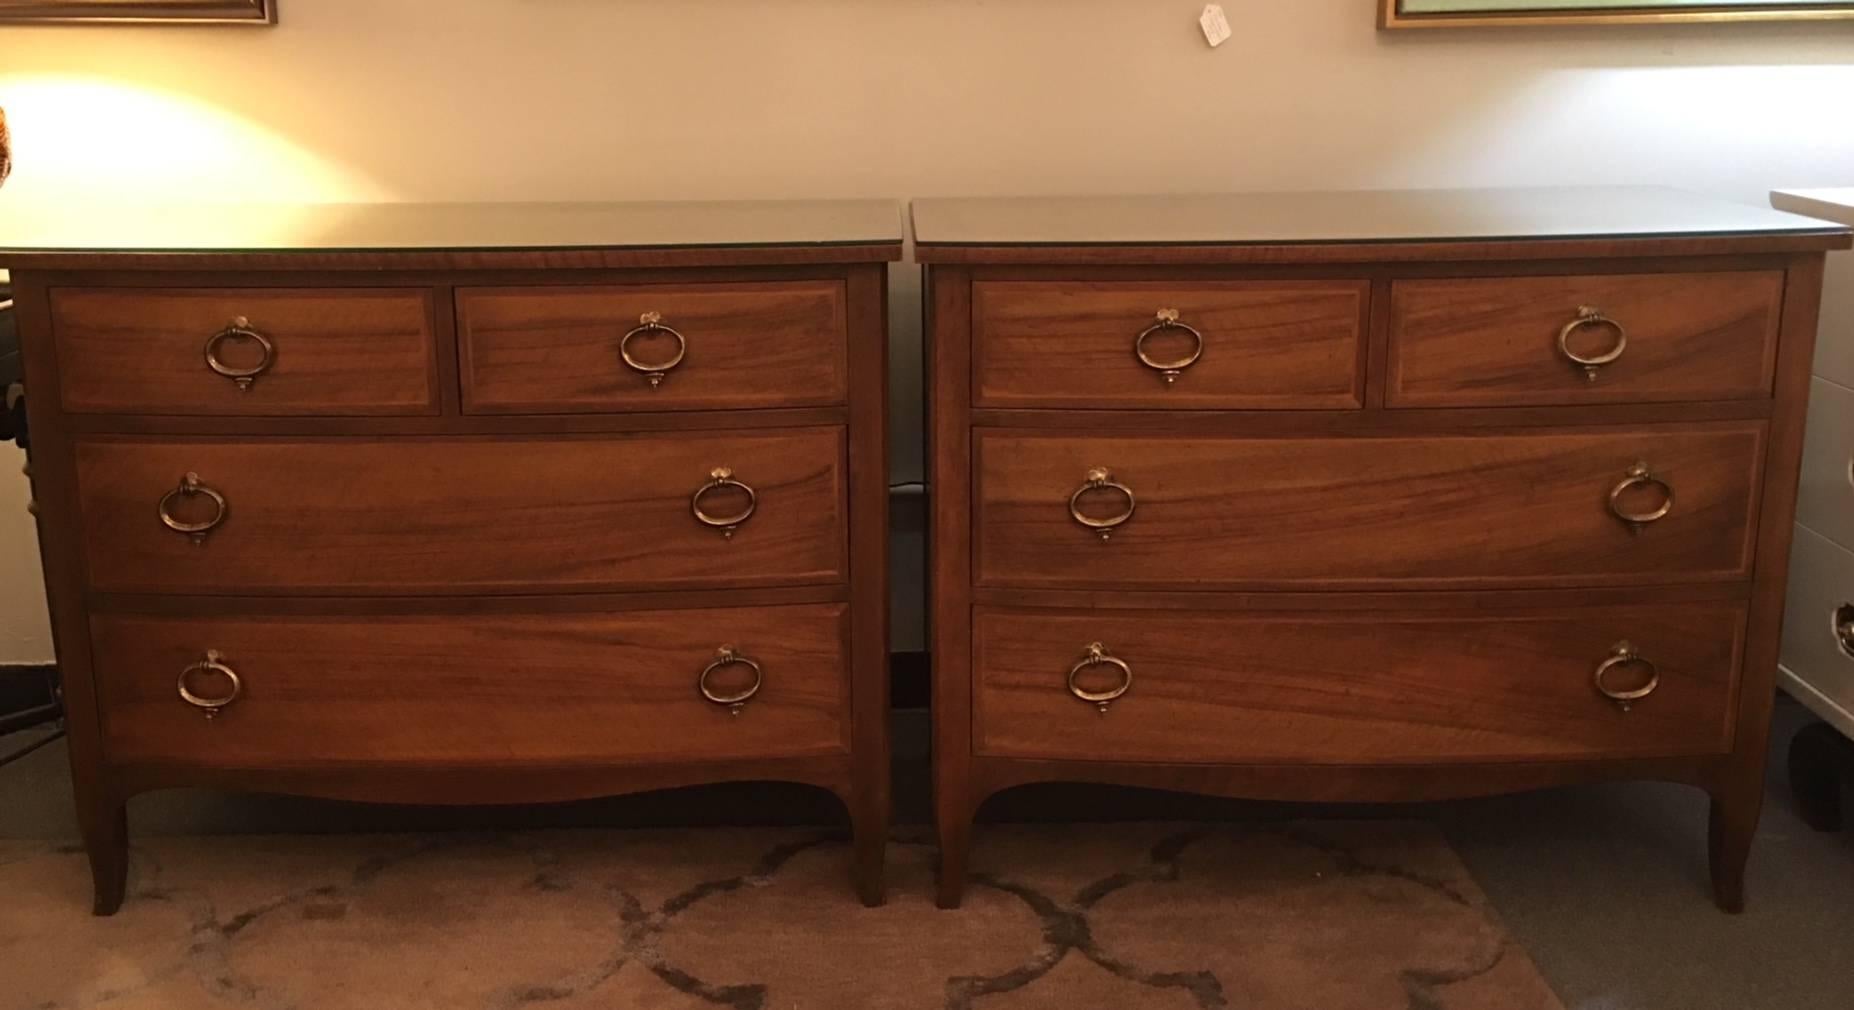 This pair of Baker chests is the perfect size for a million uses, but the first that comes to mind is the hard-to-find bedside chests. It is great to have something with more than a square foot upon which to place your books, beverage, reading